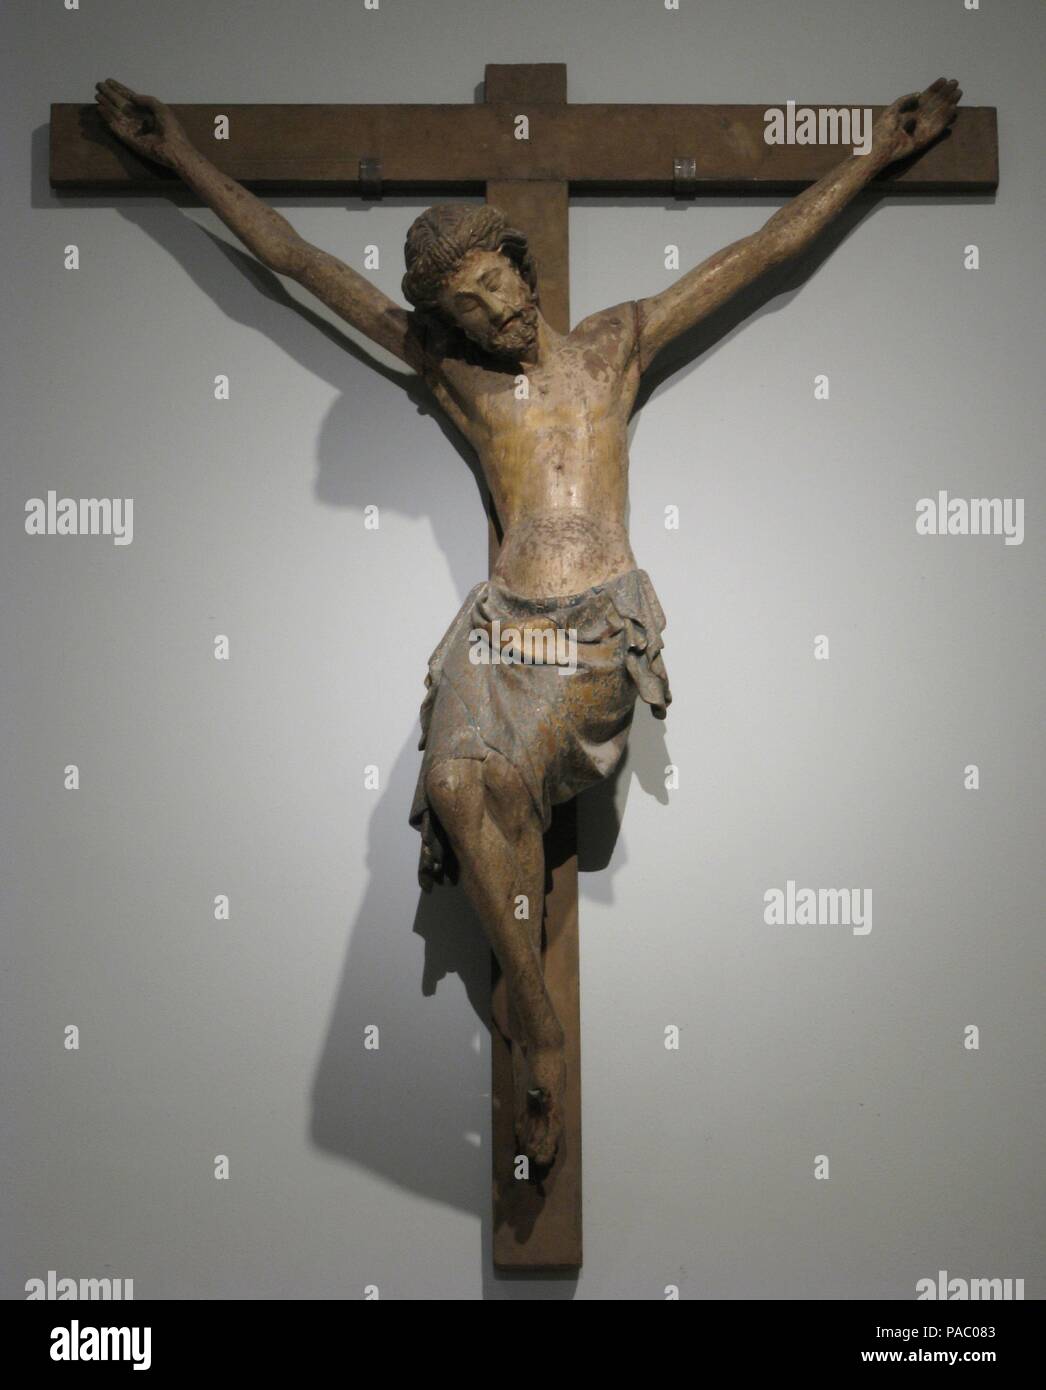 Crucifix. Culture: French. Dimensions: Overall (with cross): 59 3/4 x 45 5/8 x 13 1/8 in. (151.8 x 115.9 x 33.3 cm)  Overall (without cross): 55 1/8 x 41 5/16 x 12 1/8 in. (140 x 105 x 30.8 cm)  weight: 33lb. (15kg). Date: ca. 1300.  The image of the suffering Christ crucified with three nails emerged in western Europe in the 1100s. Such crucifixes, with Christ wearing a crown of thorns, played a part in devotions relating to the Passion liturgy. Museum: Metropolitan Museum of Art, New York, USA. Stock Photo